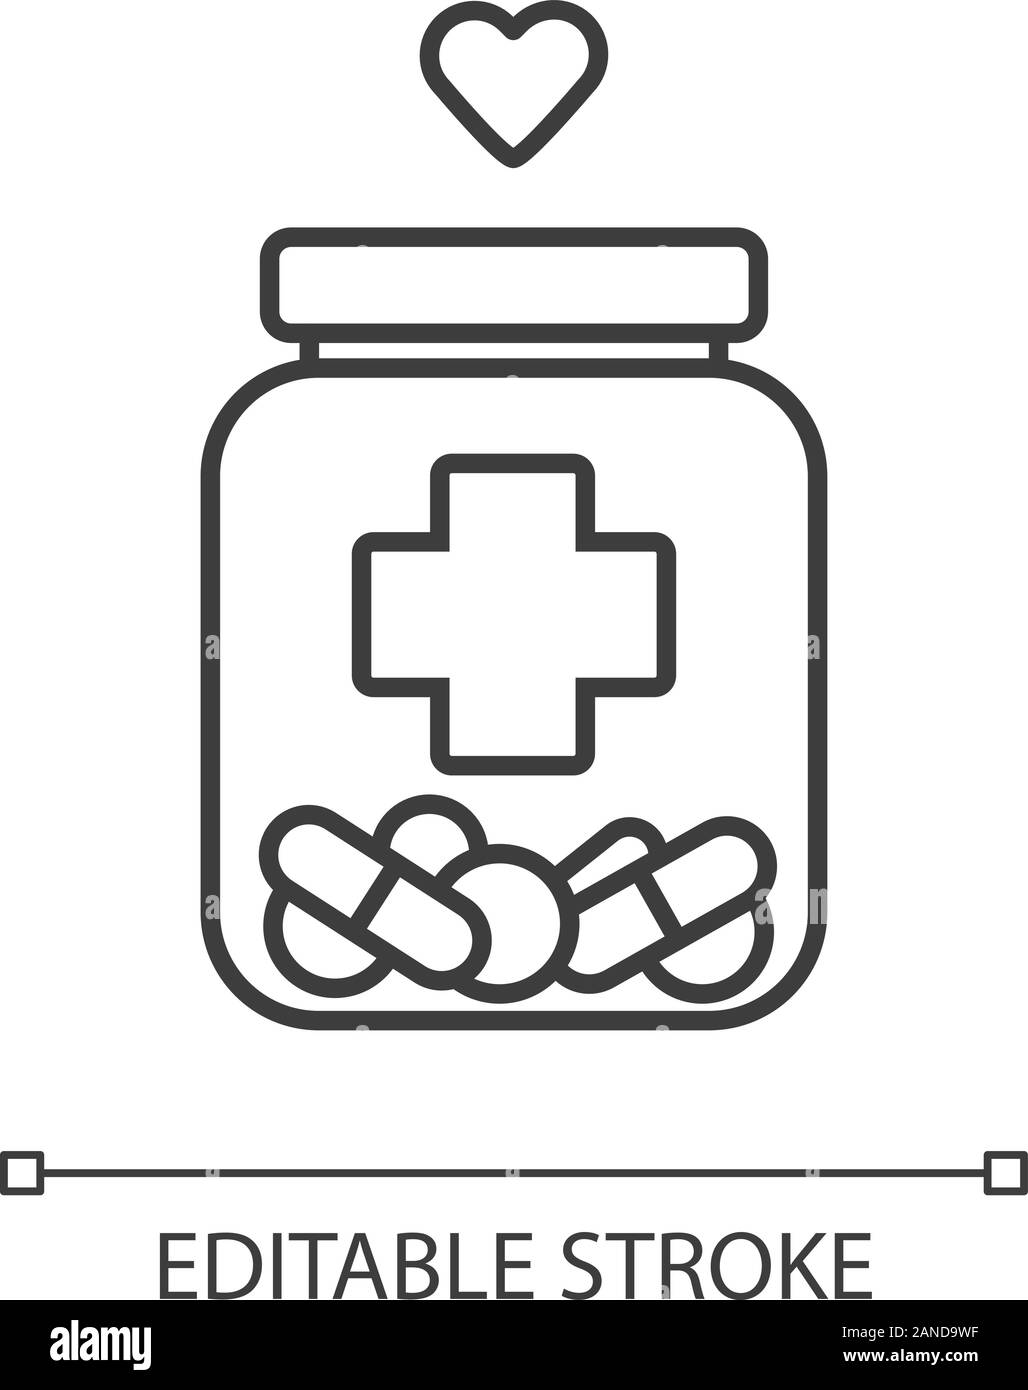 https://c8.alamy.com/comp/2AND9WF/medical-aid-linear-icon-nursing-service-medical-volunteering-course-of-treatment-bottle-with-drugs-heart-thin-line-illustration-contour-symbol-2AND9WF.jpg